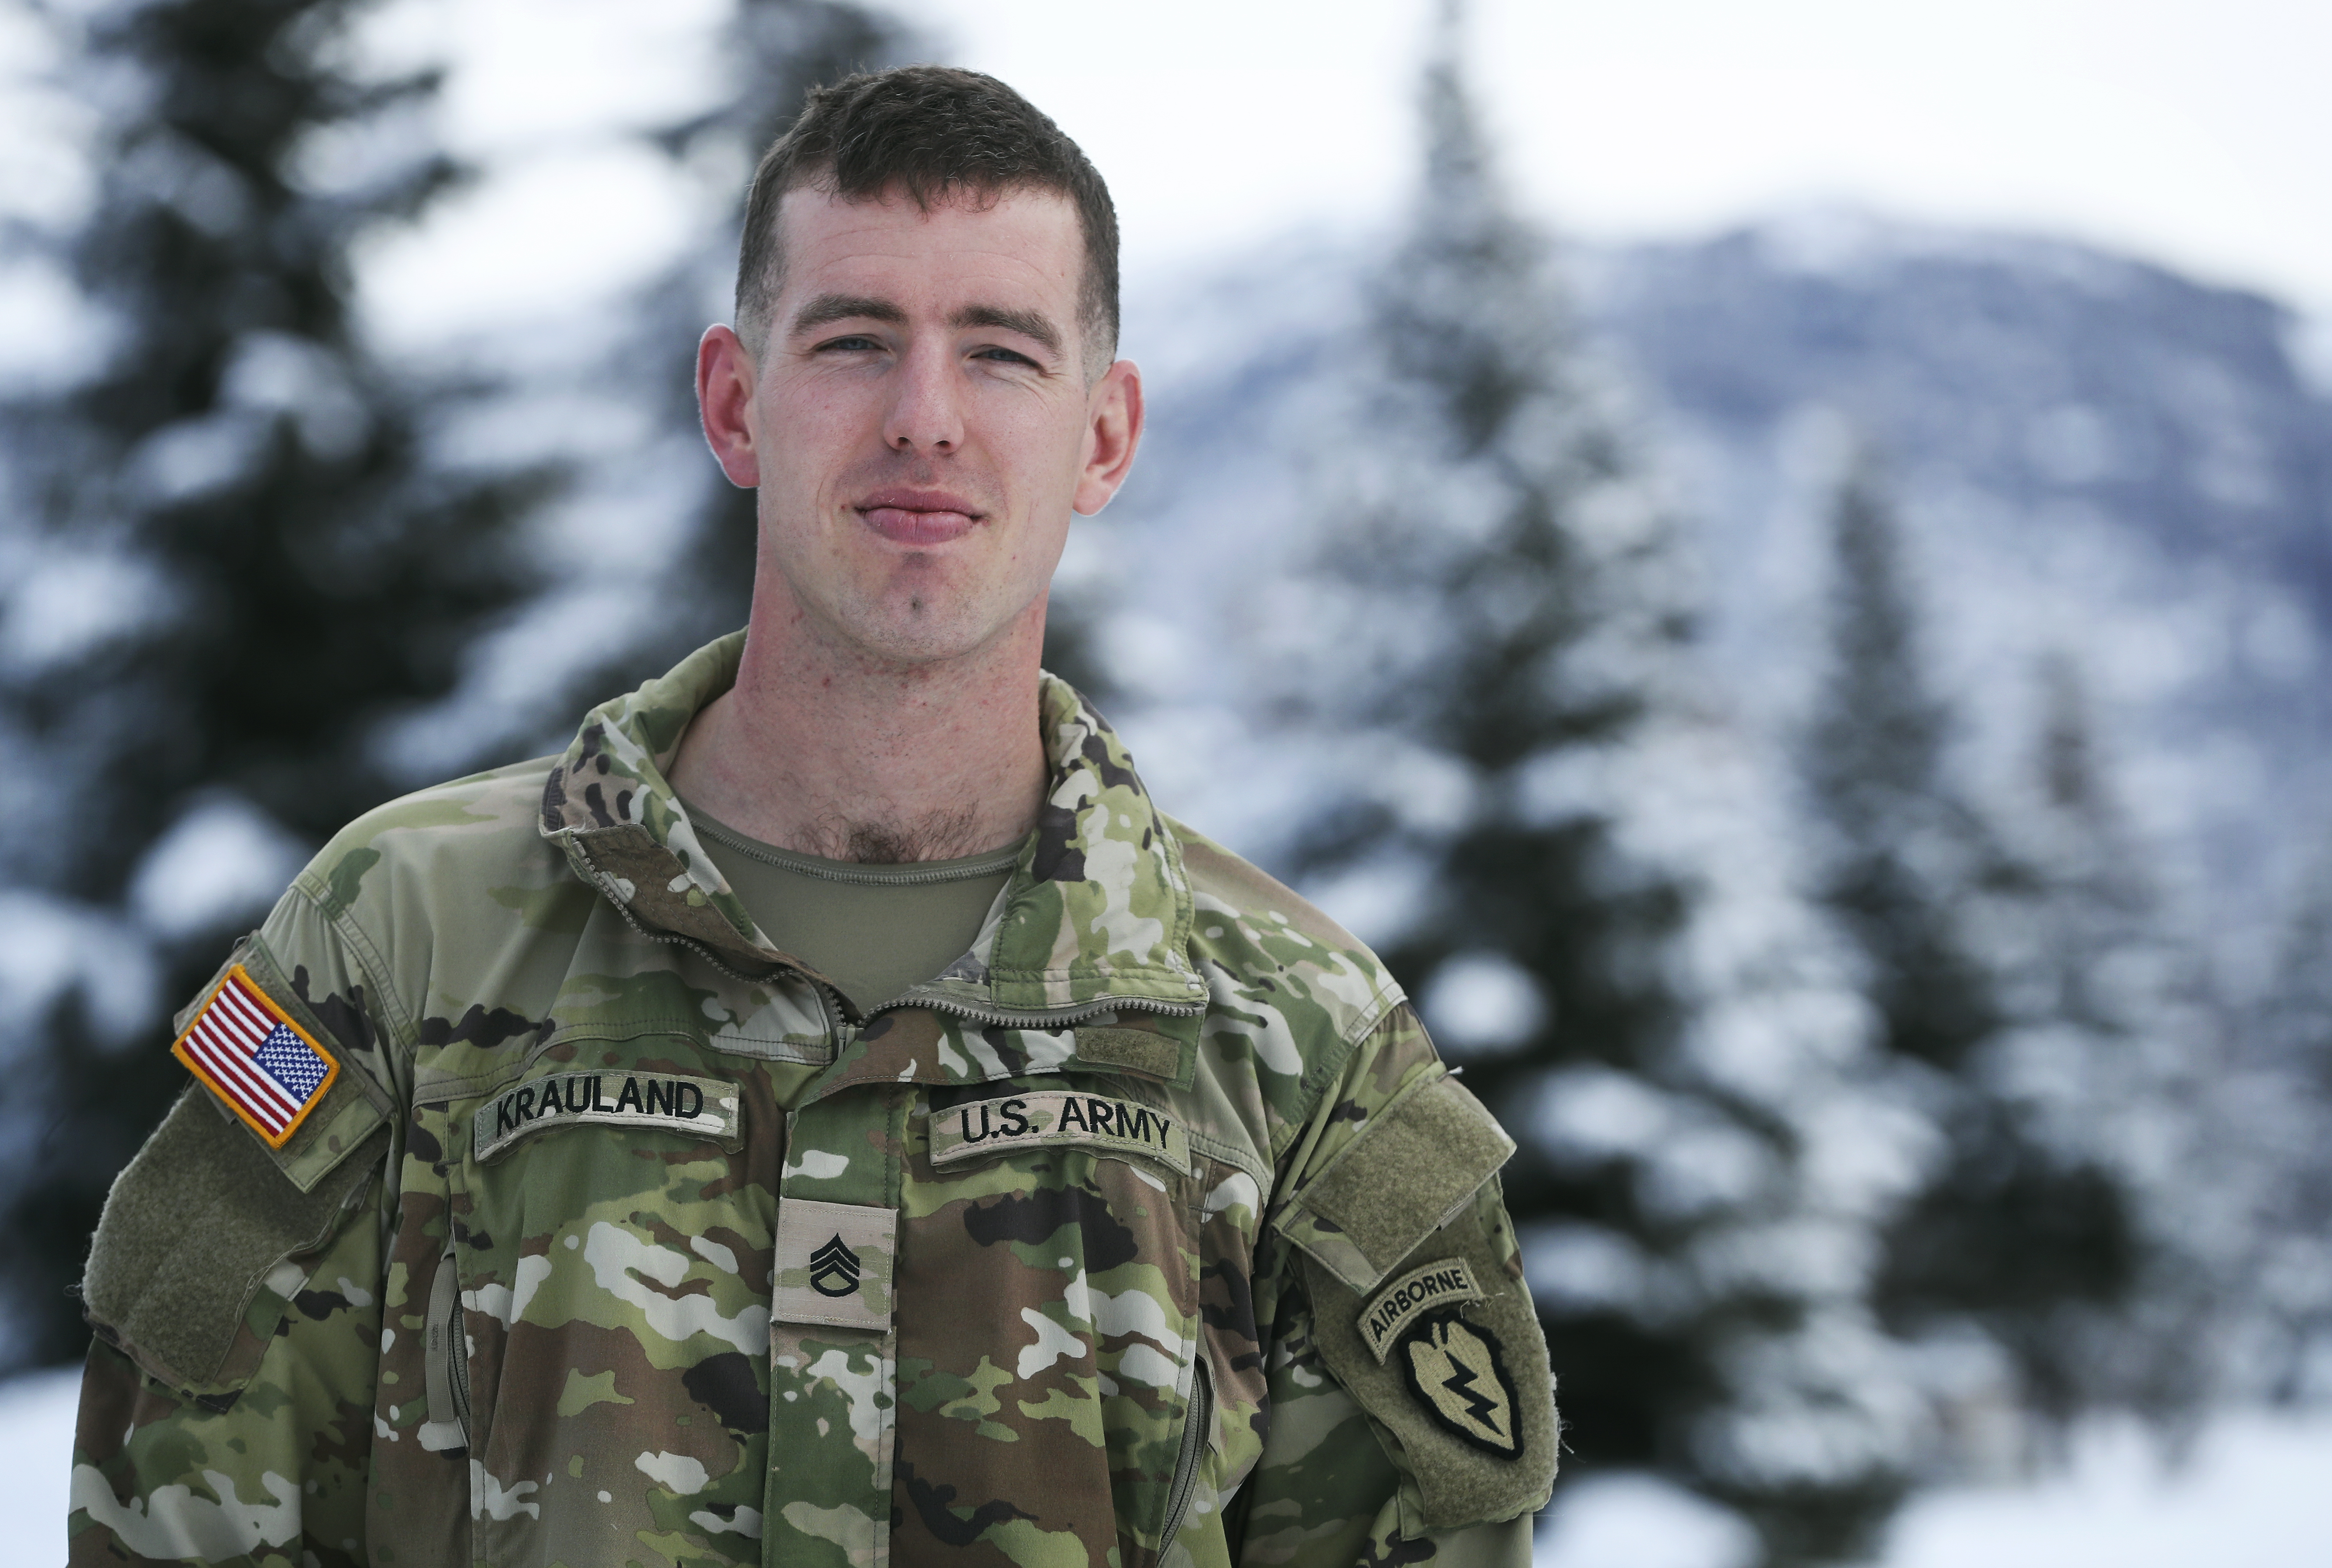 The Army Reserve recognizes Wisconsin Soldier for his heroics during  off-duty hours - Article - The United States Army